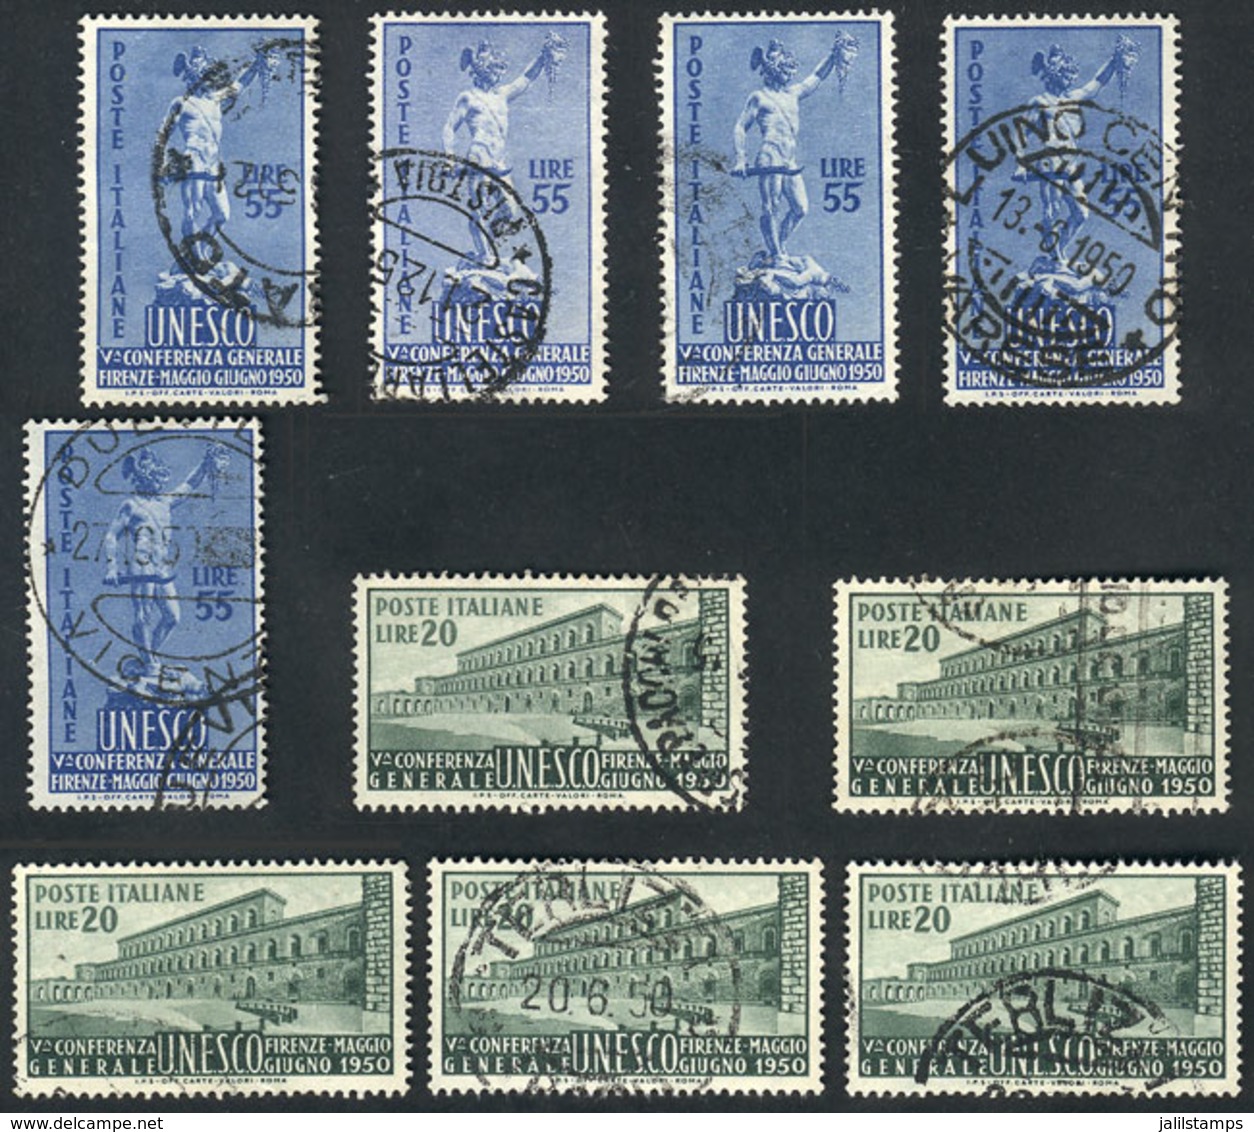 ITALY: Yvert 556/557, 1950 UNESCO, 5 Used Sets, VF Quality, Catalog Value Euros 115 - Unclassified